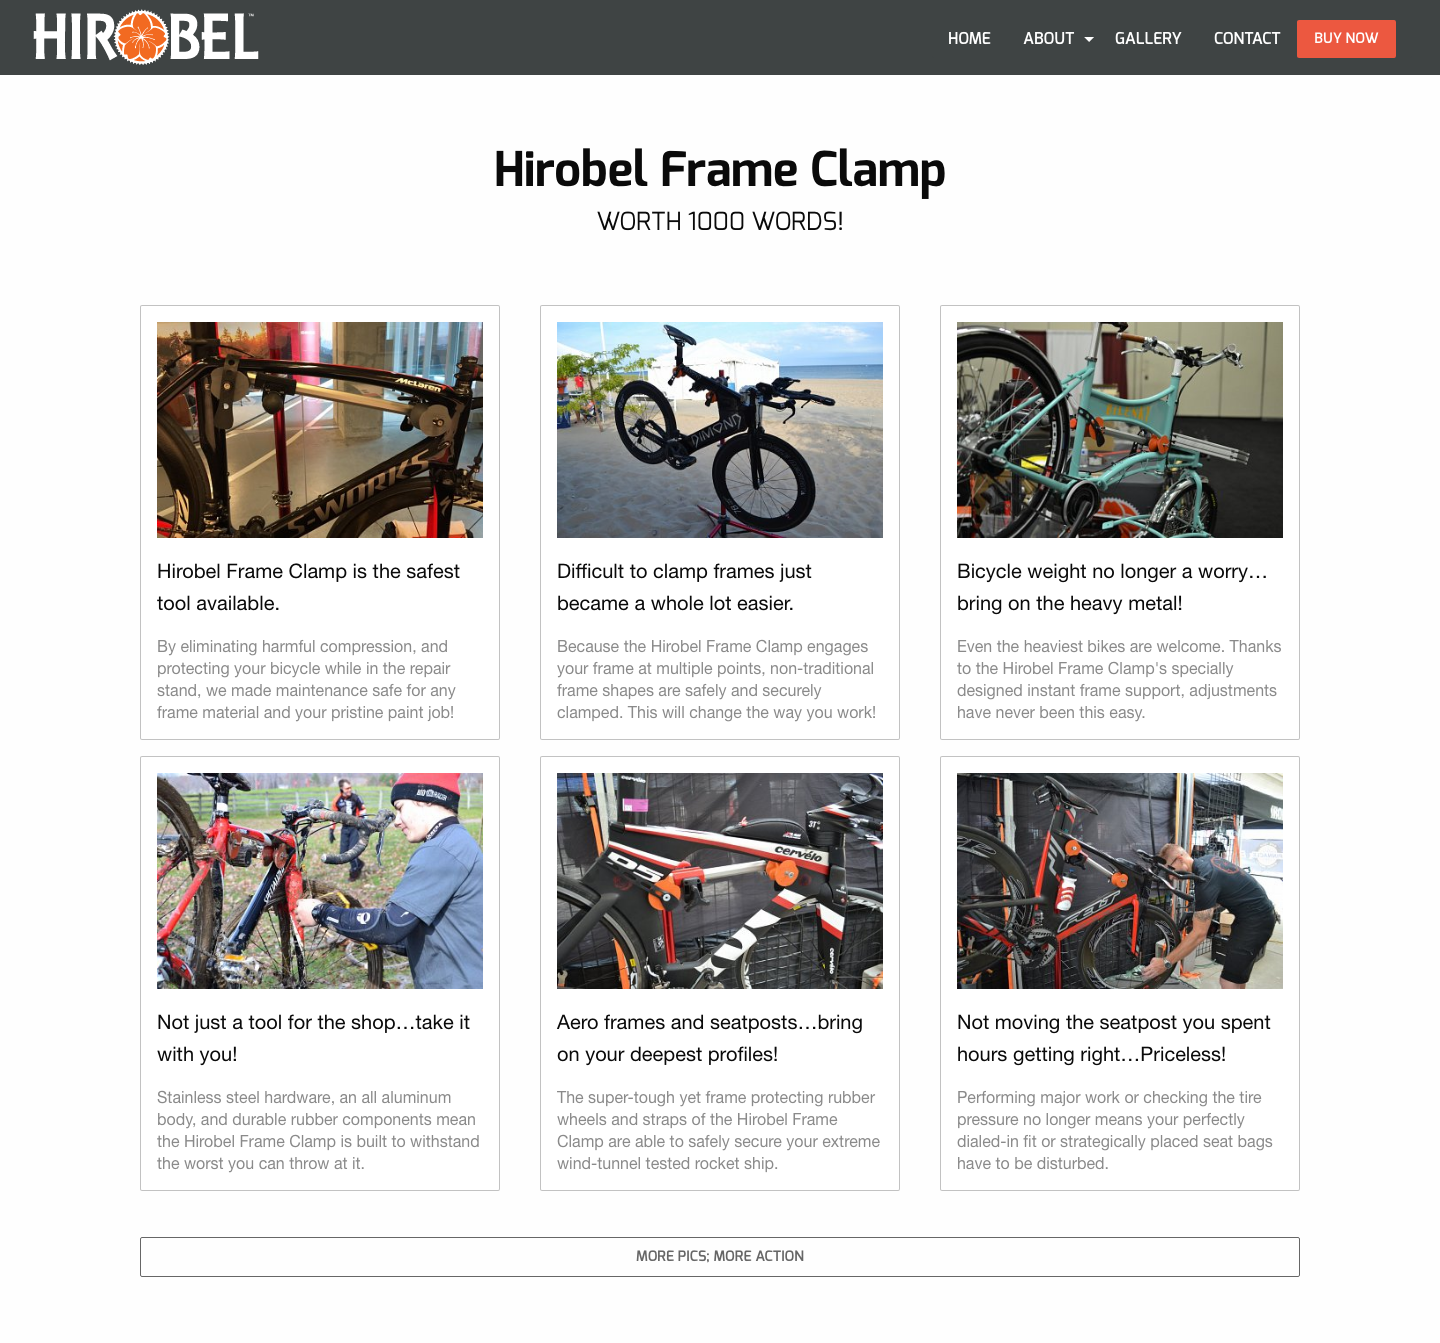 Hirobel images, landing page, link to gallery